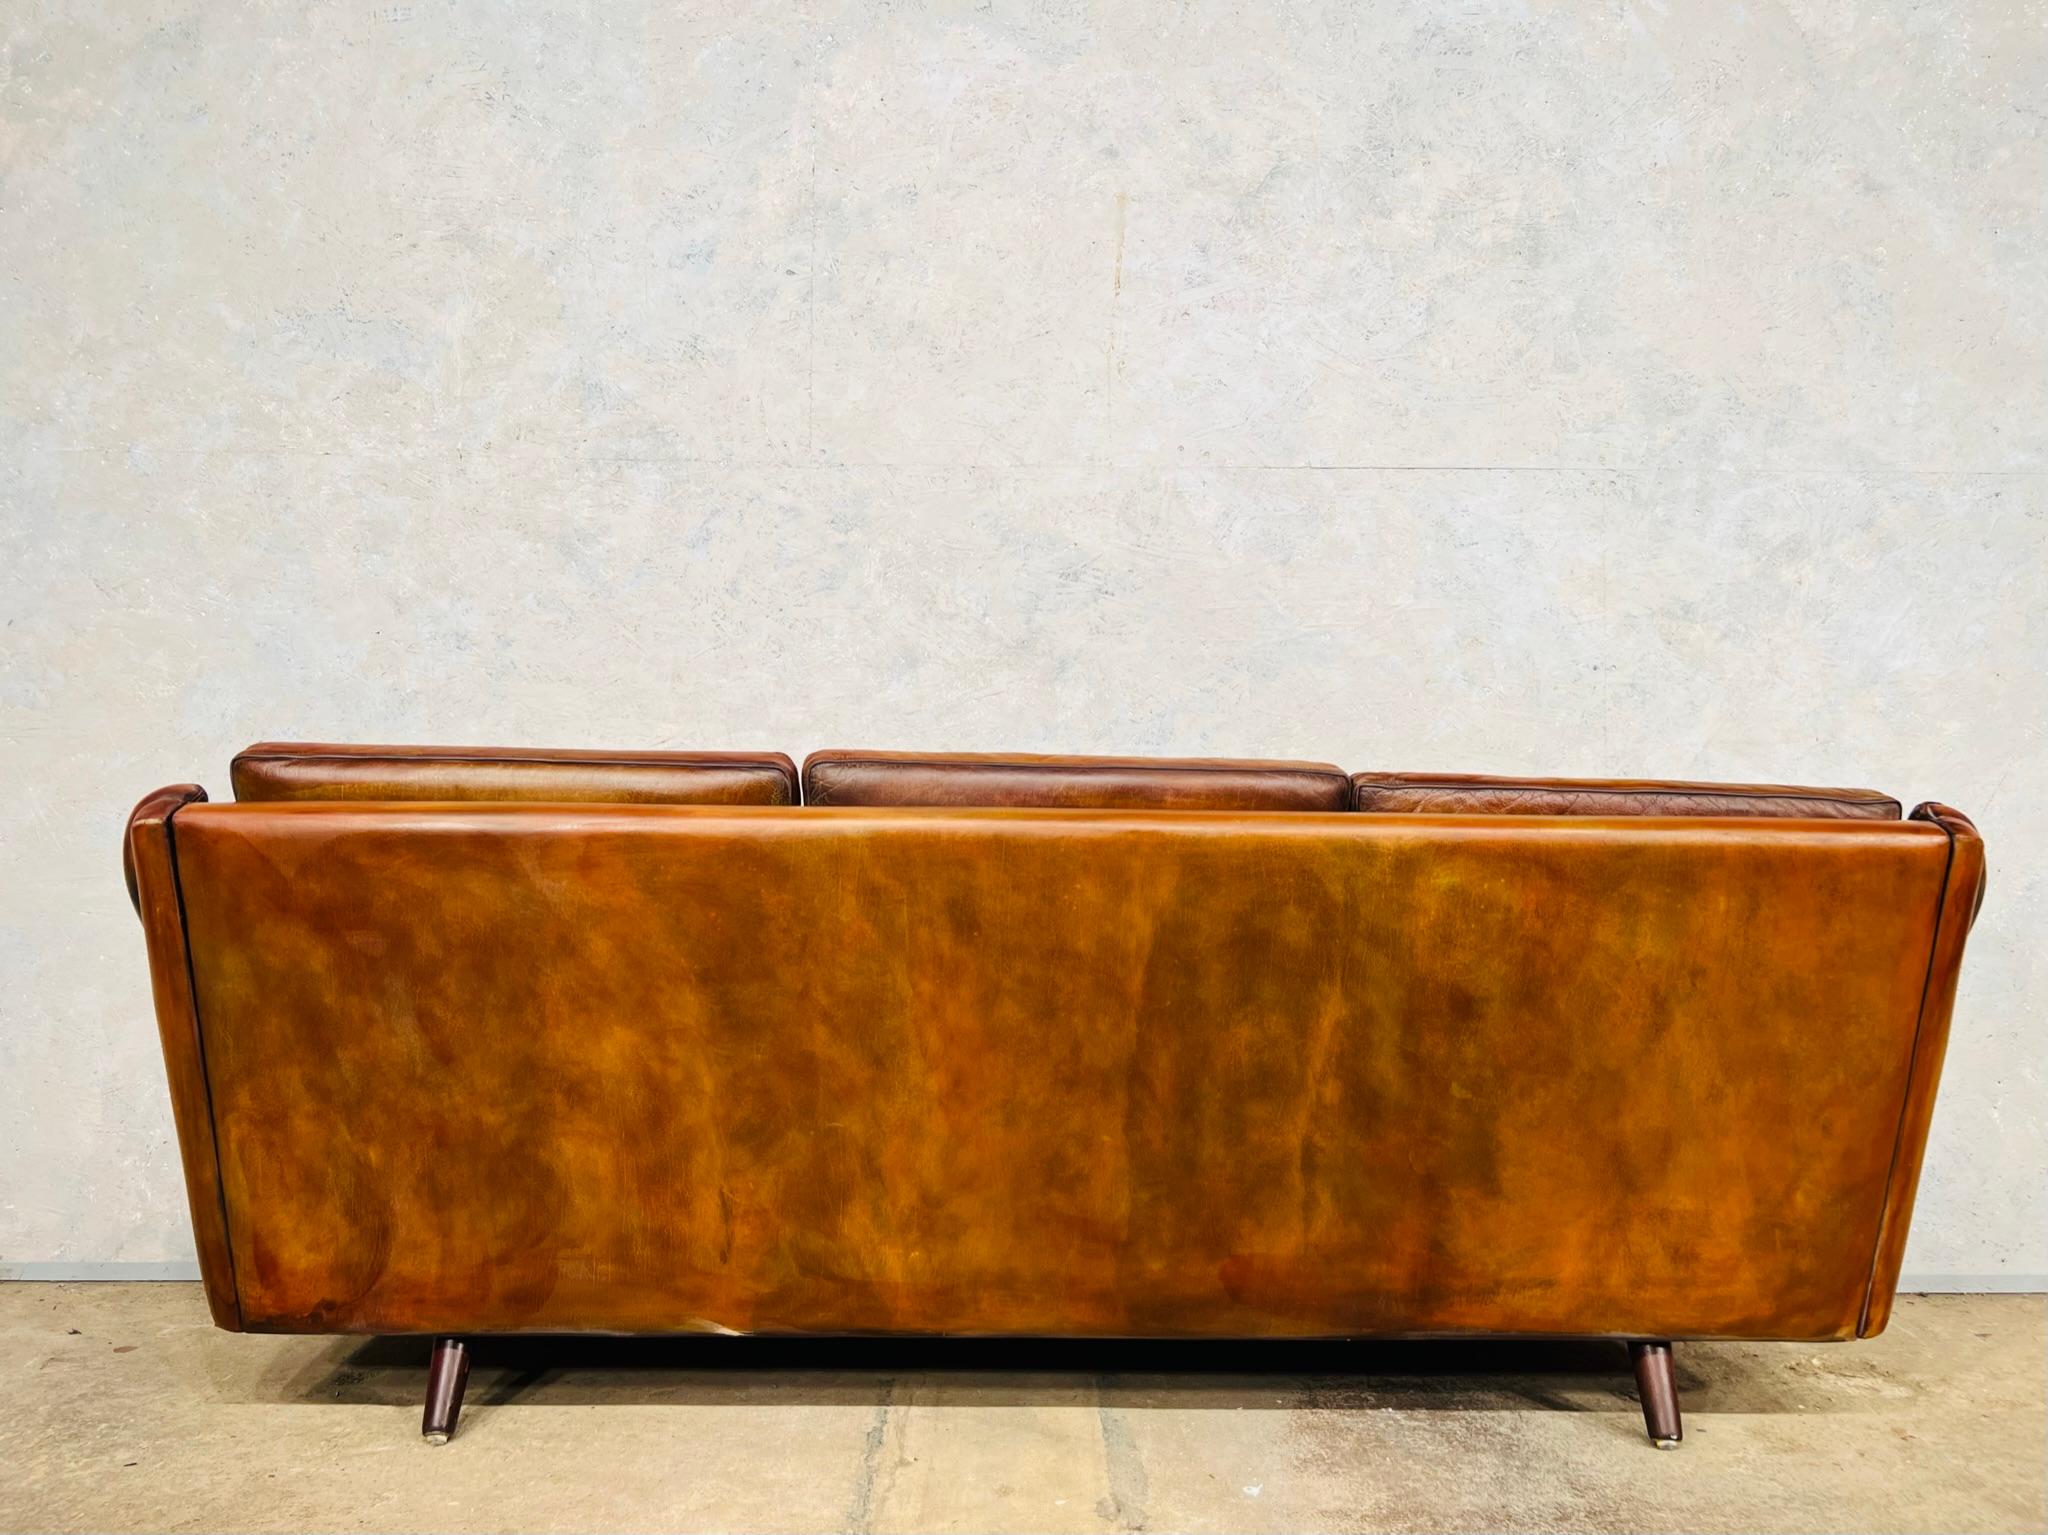 Matador Leather 3 Seater Sofa by Aage Christiansen for Eran 1960s #642 For Sale 4